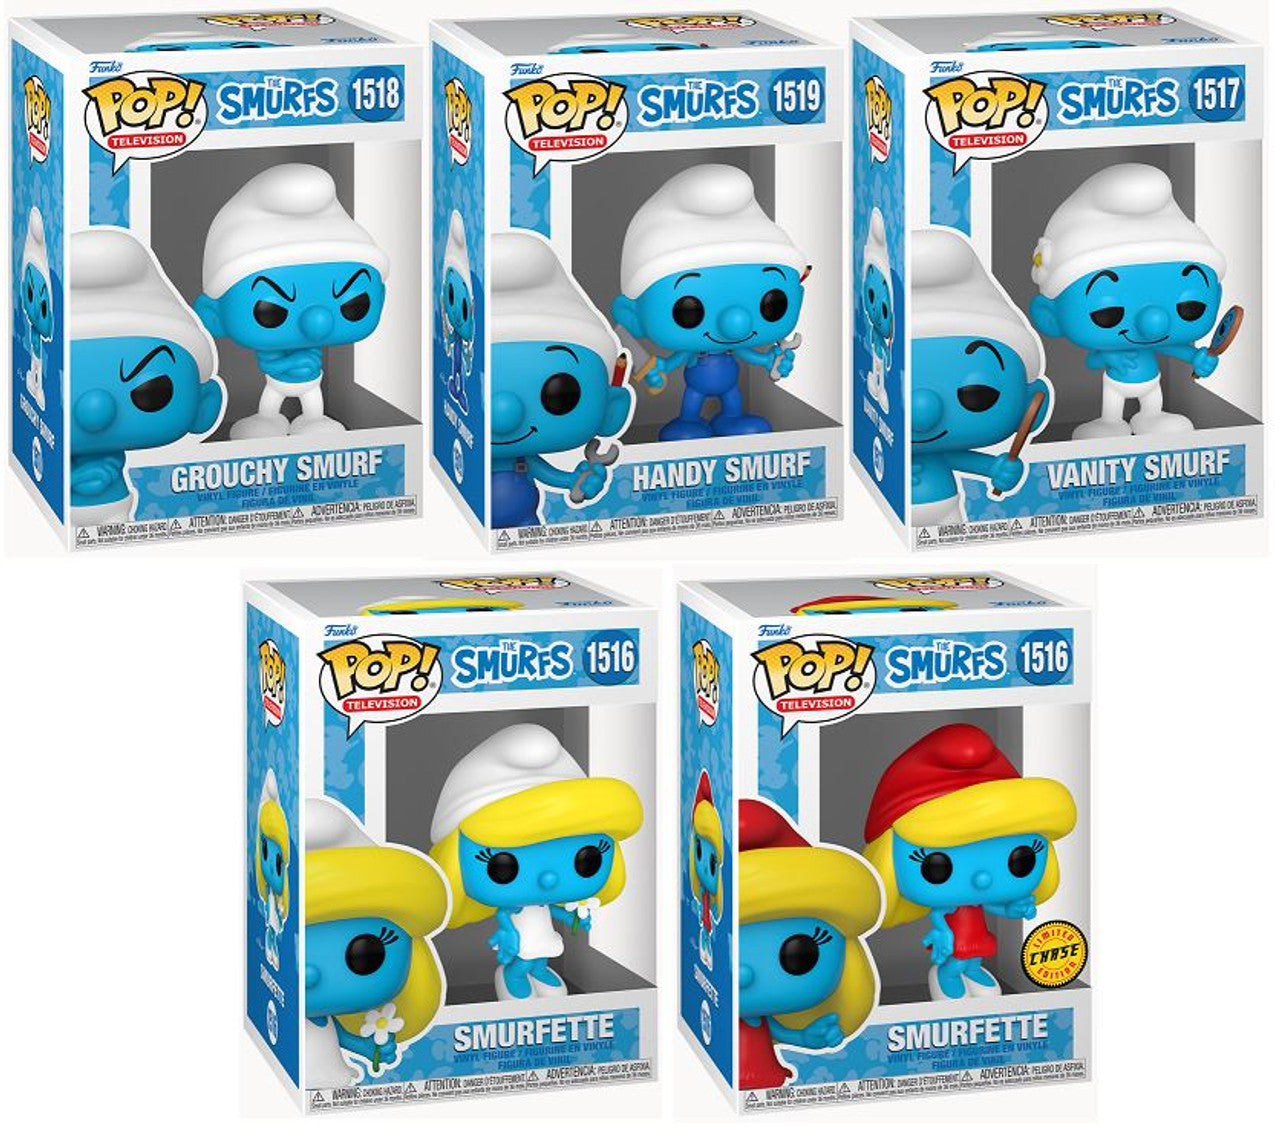 Smurfs Classics Pop! Series 2 Complete Set 5 w/CHASE